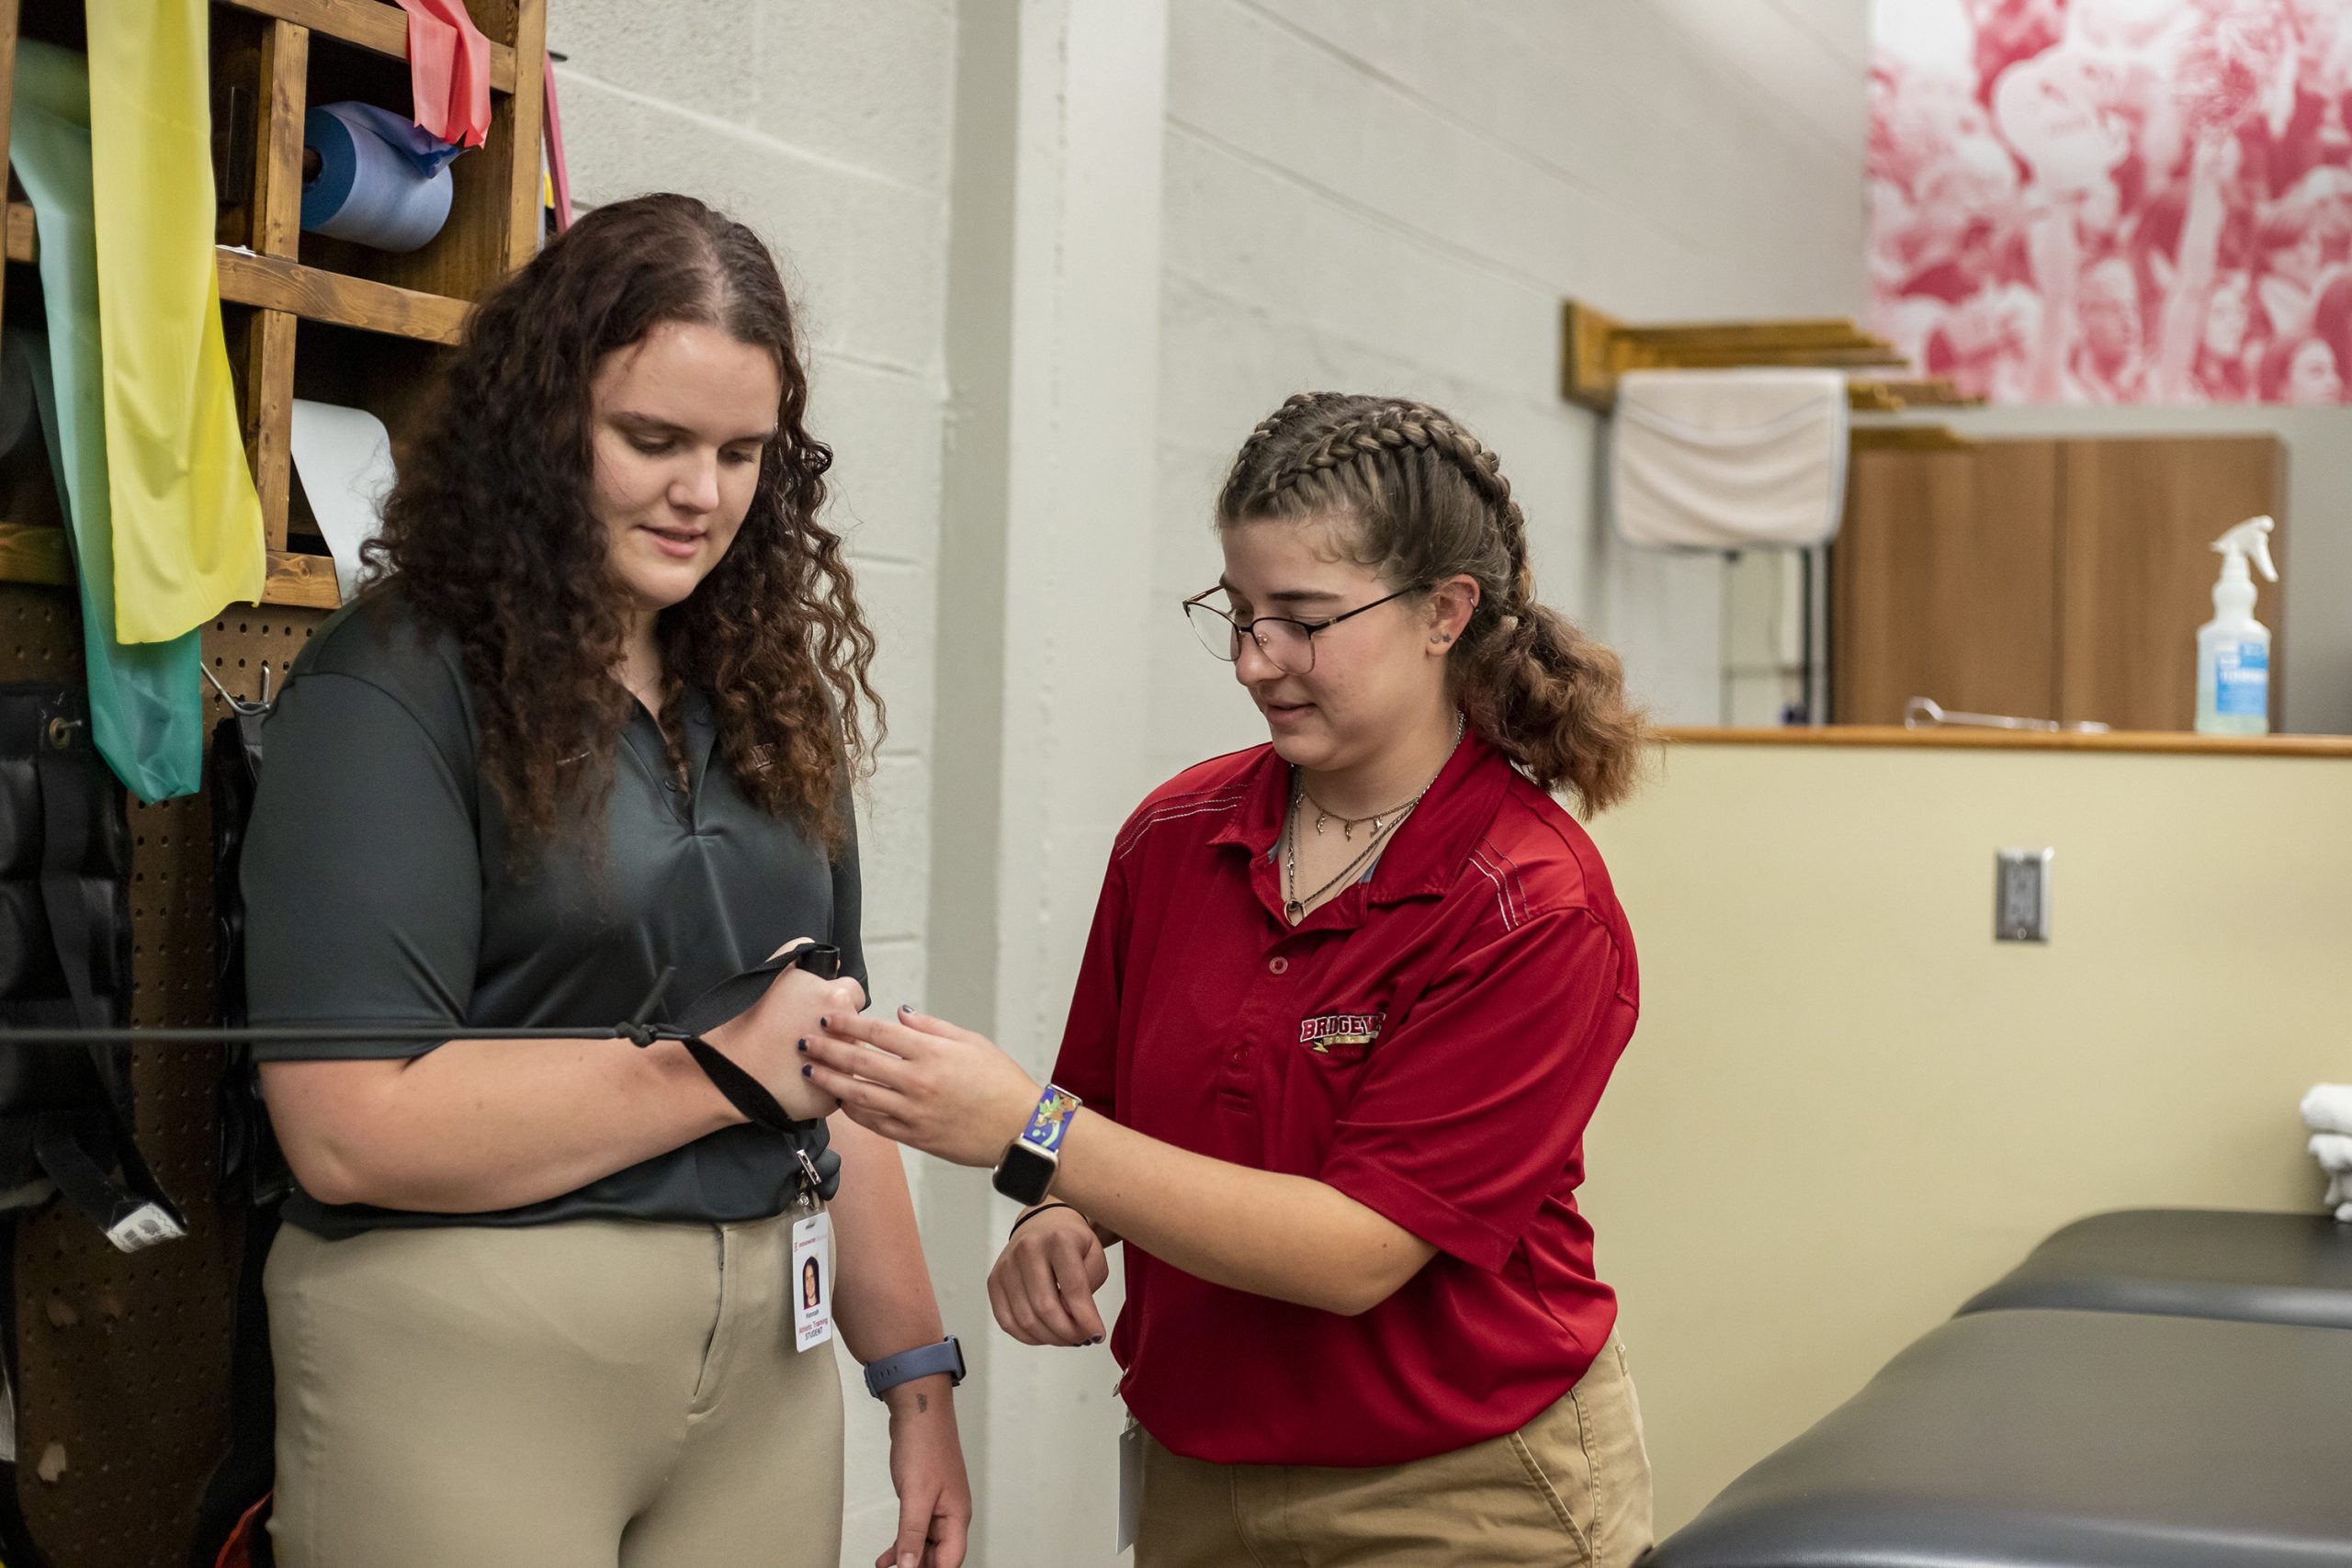 Athletic training students working in a clinical environment